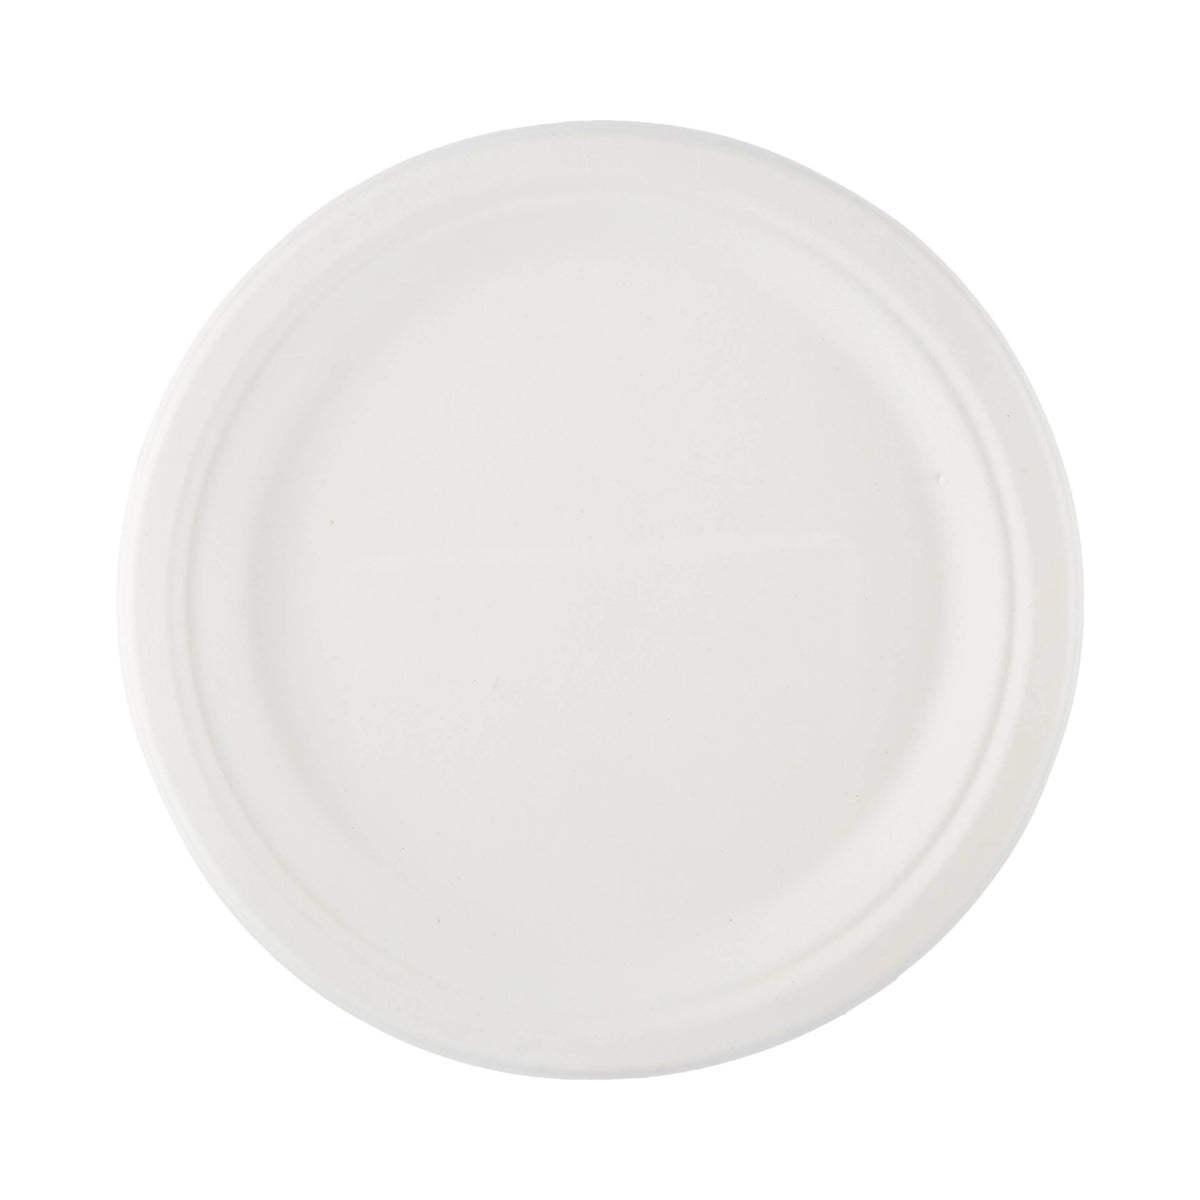 Bio-Degradable Plate 9 Inch 500 Pieces - Hotpack Global